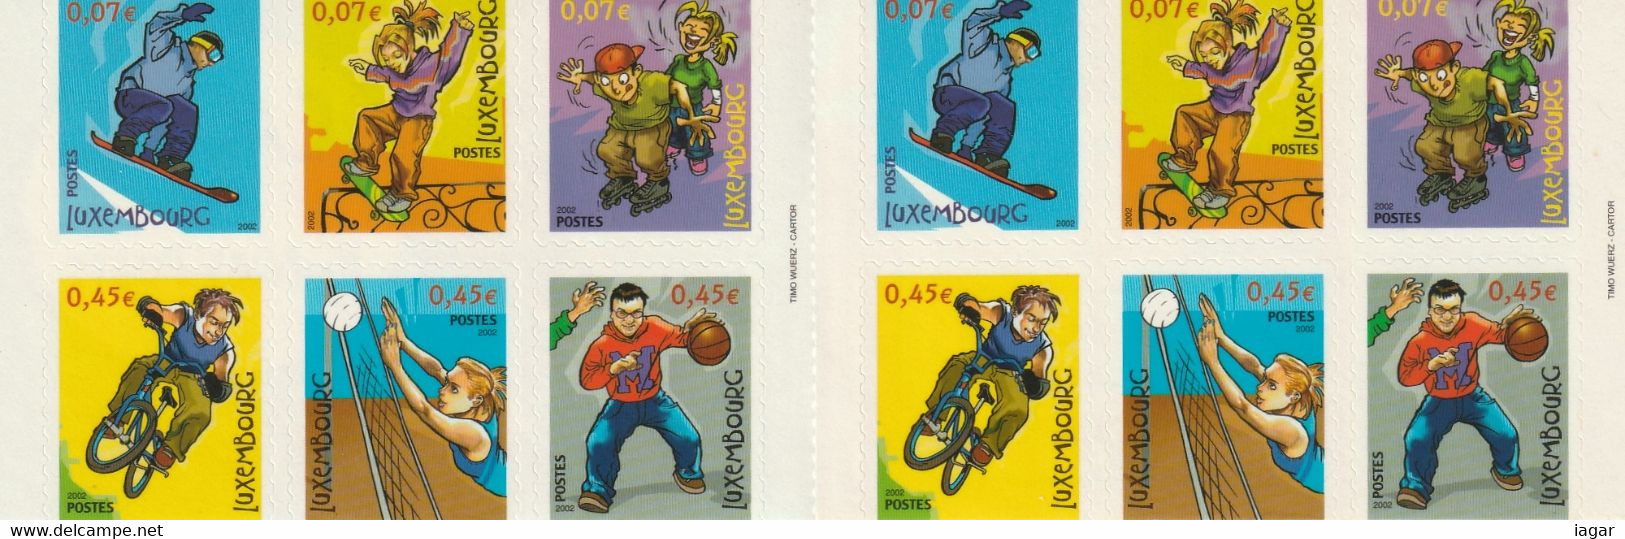 LUXEMBOURG 2002 - 'FUNSPORT', AUTOADHESIVE BOOKLET - Booklets